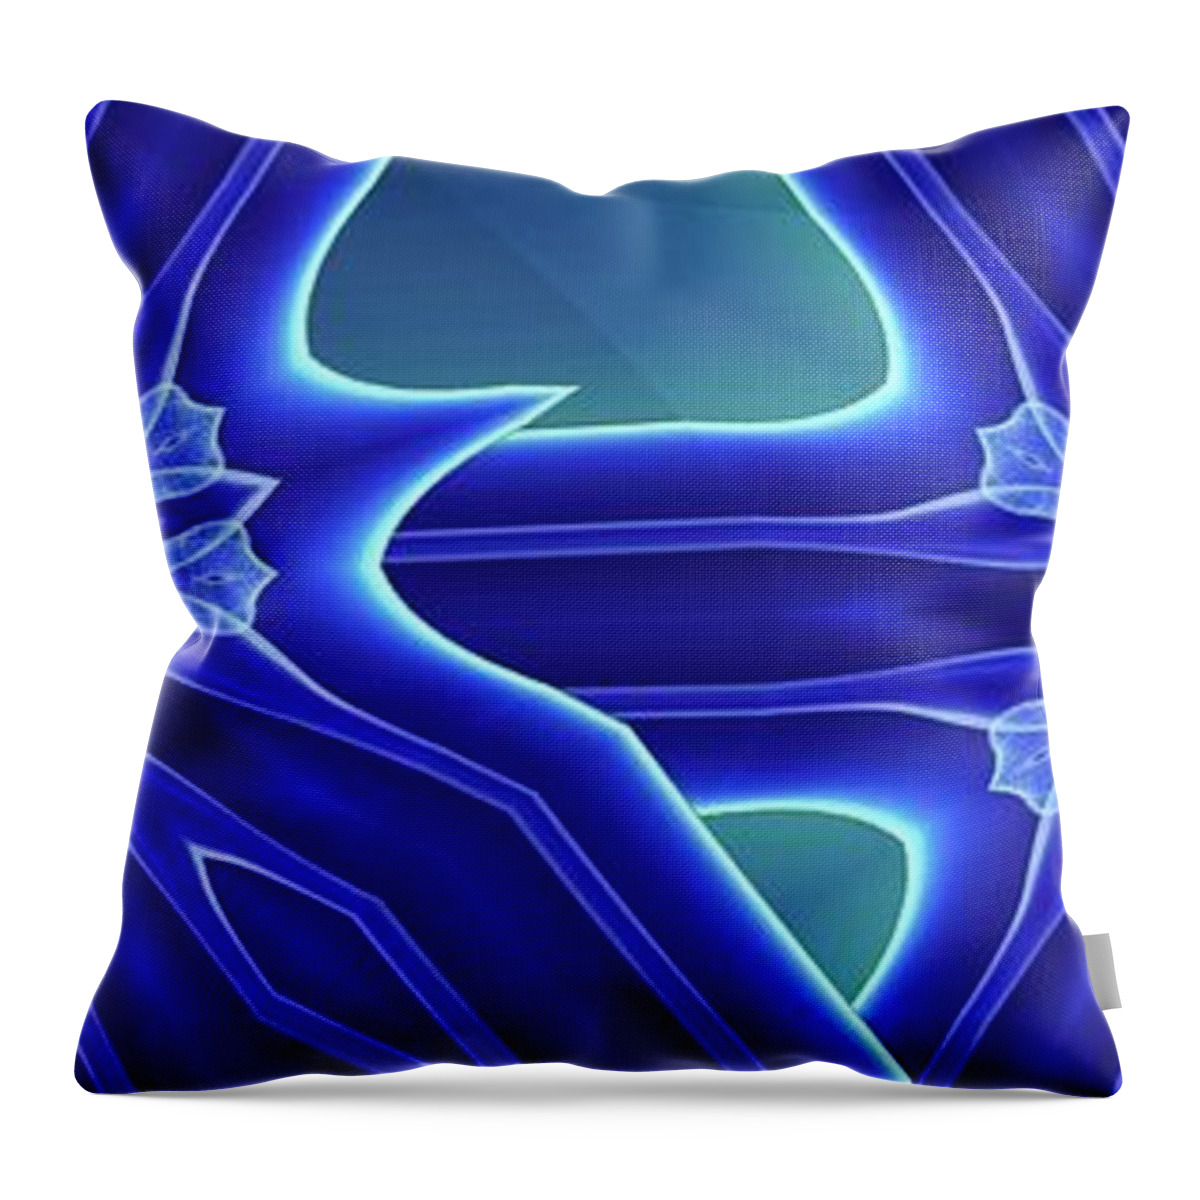 Collage Throw Pillow featuring the digital art Blued by Ron Bissett